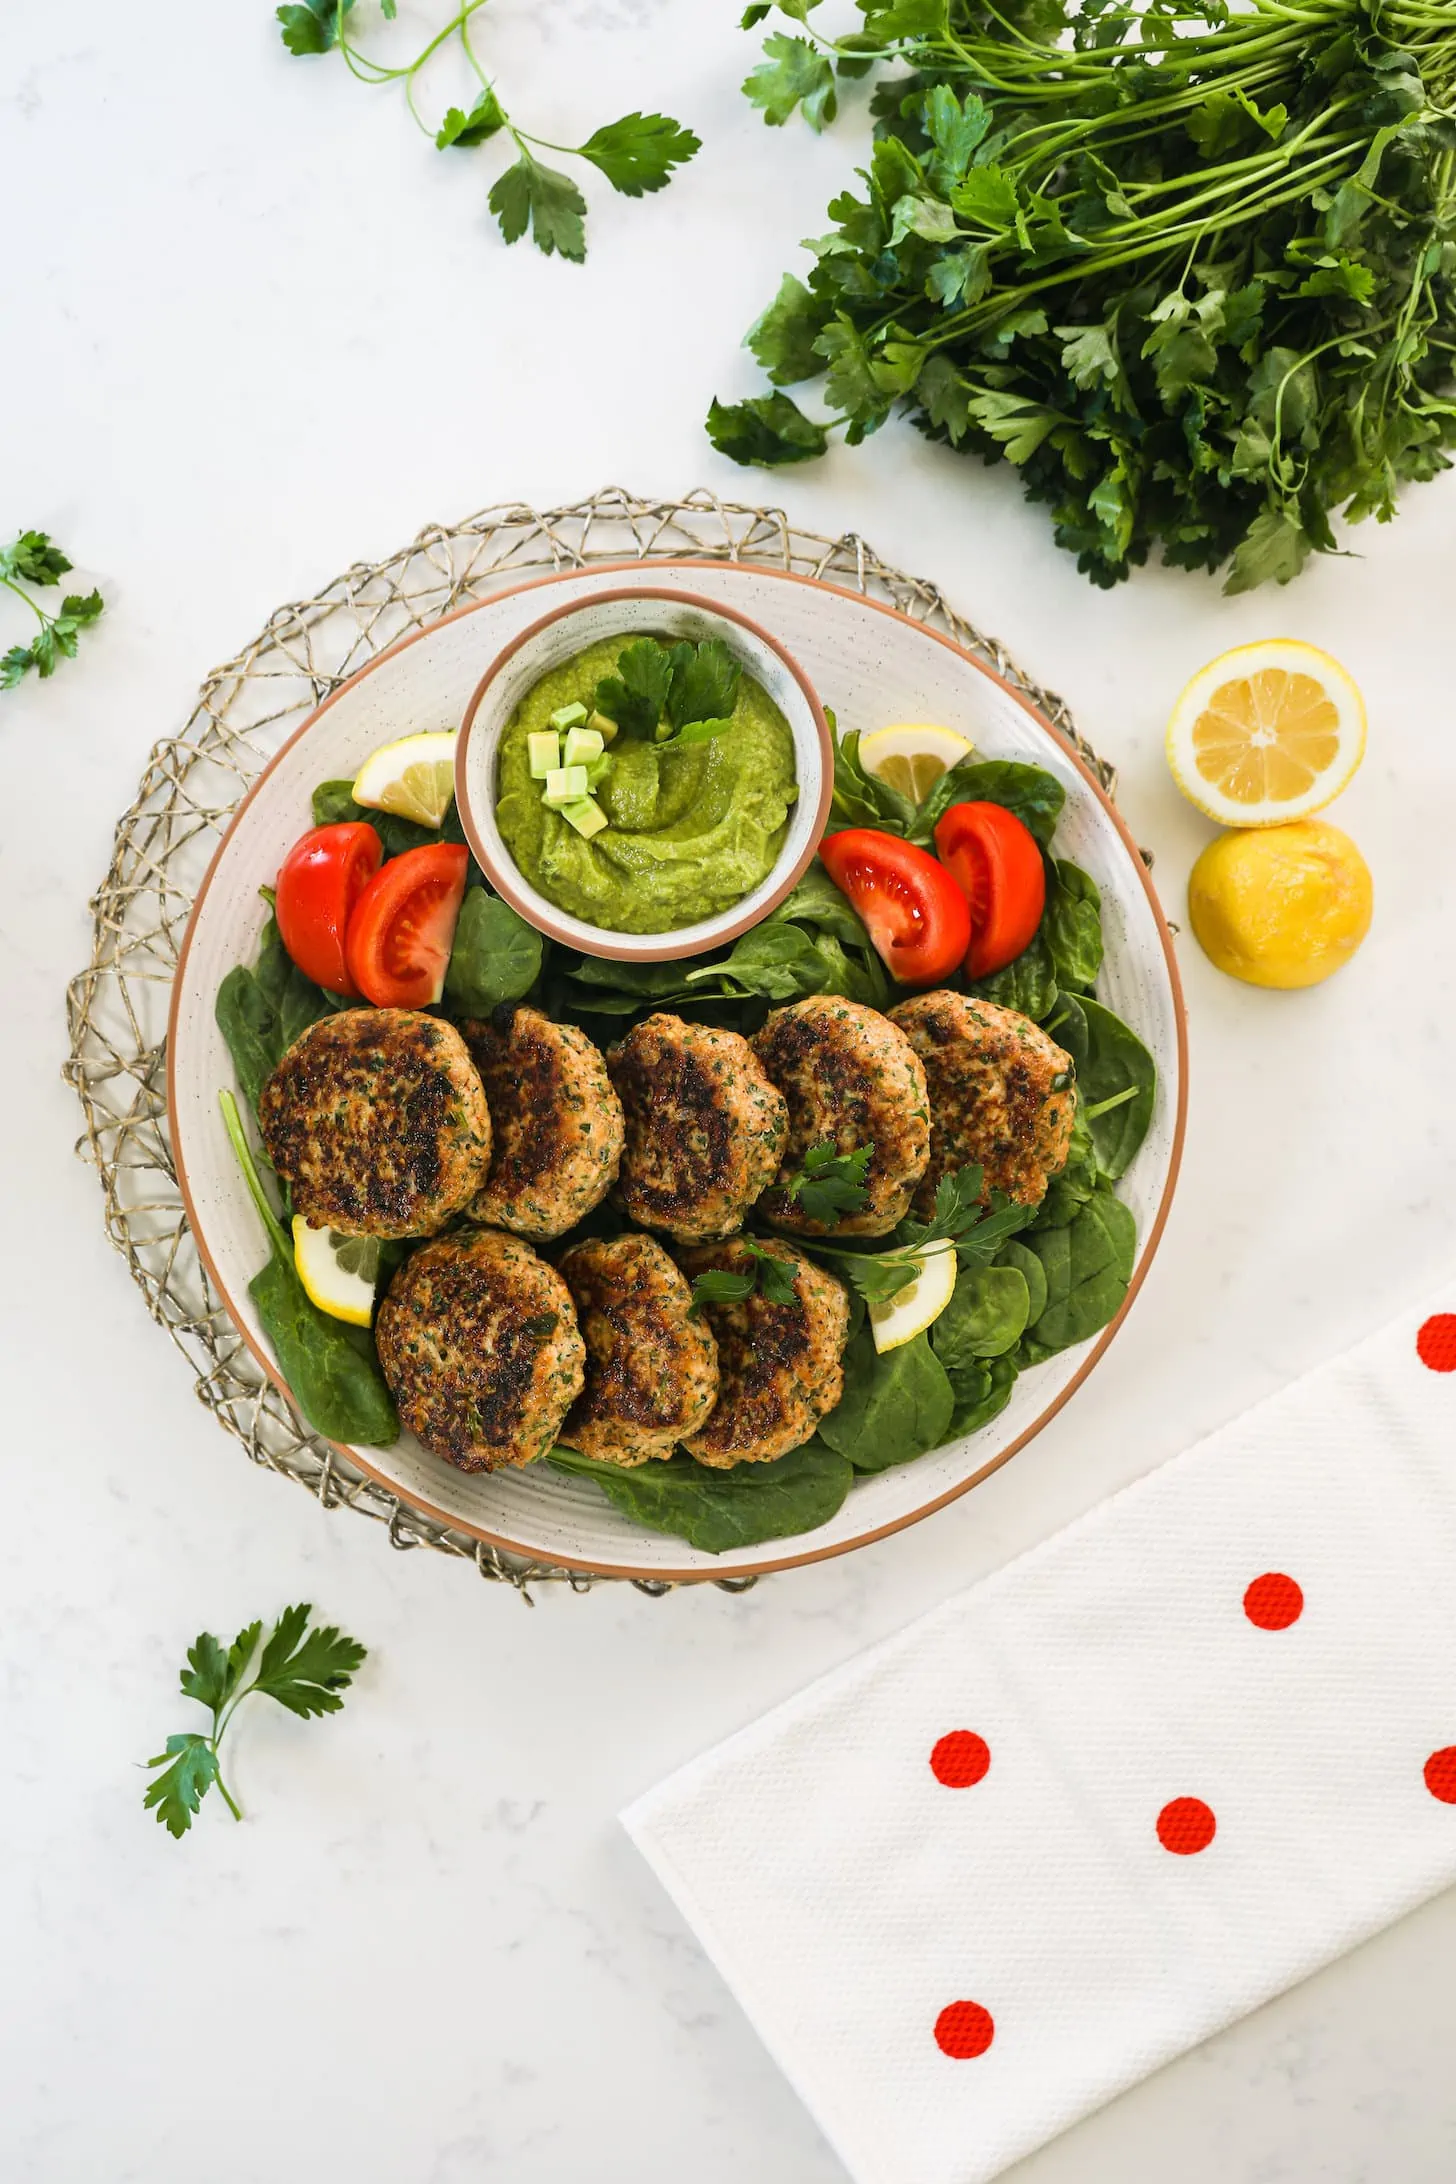 Flat lay shot of a plate of cooked patties on a bed of greens with tomatoes and lemon slices arranged around them and a bowl of green dip on the side.